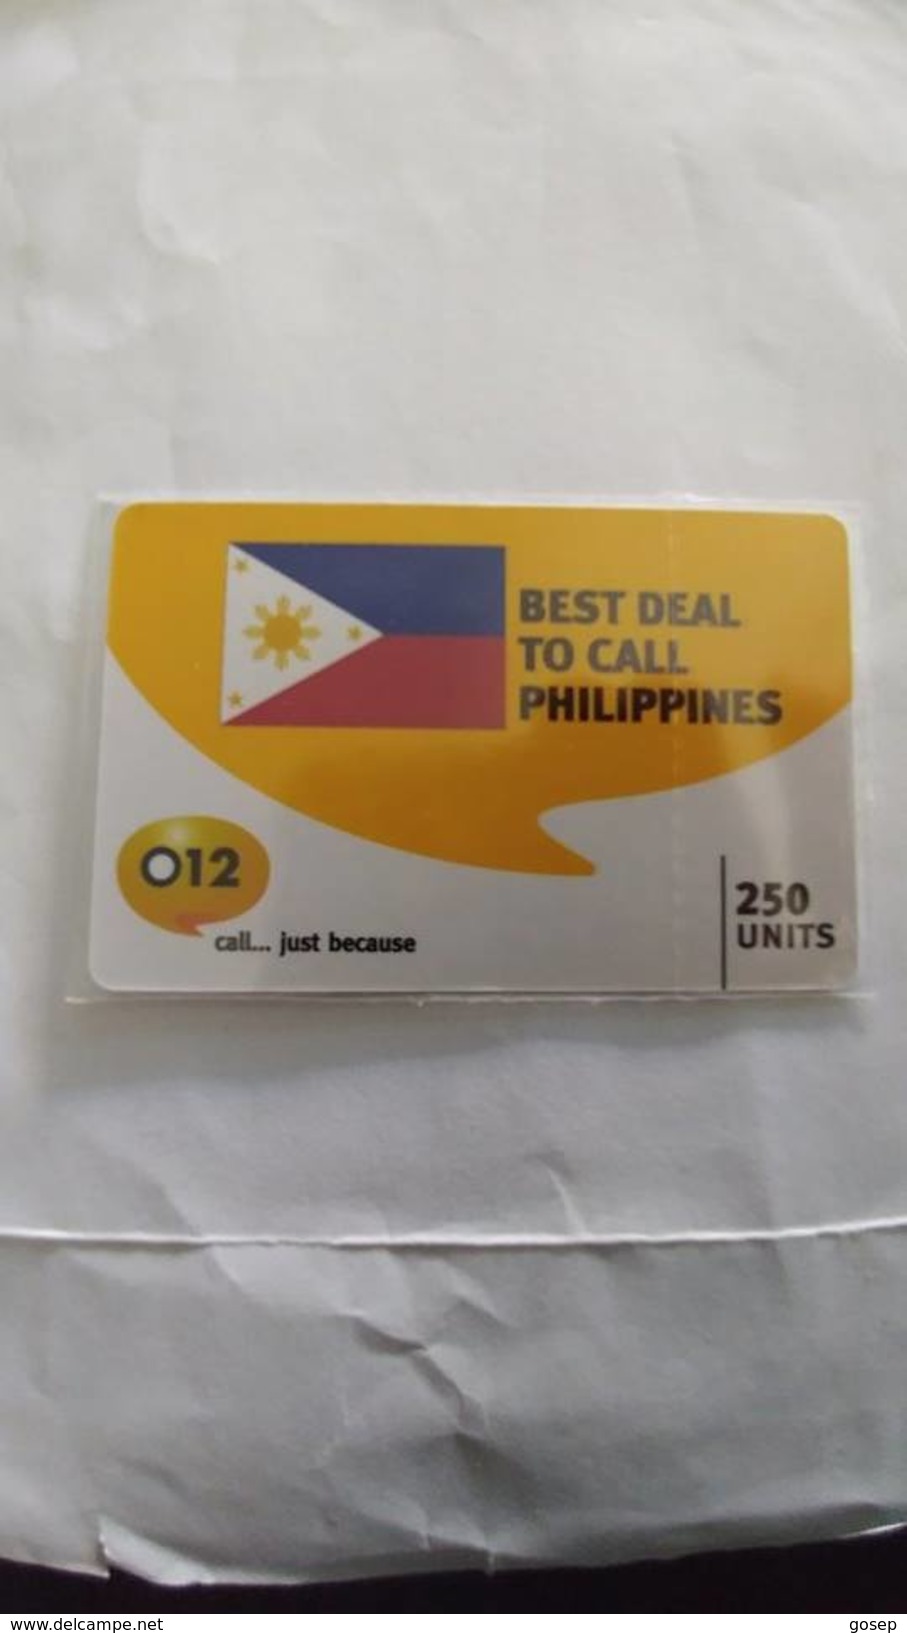 Israel-best Deal To Call Philippines-(1)-zabra-(250units)-(012call Just Because)-(1.5.2008)-mint Card - Philippinen